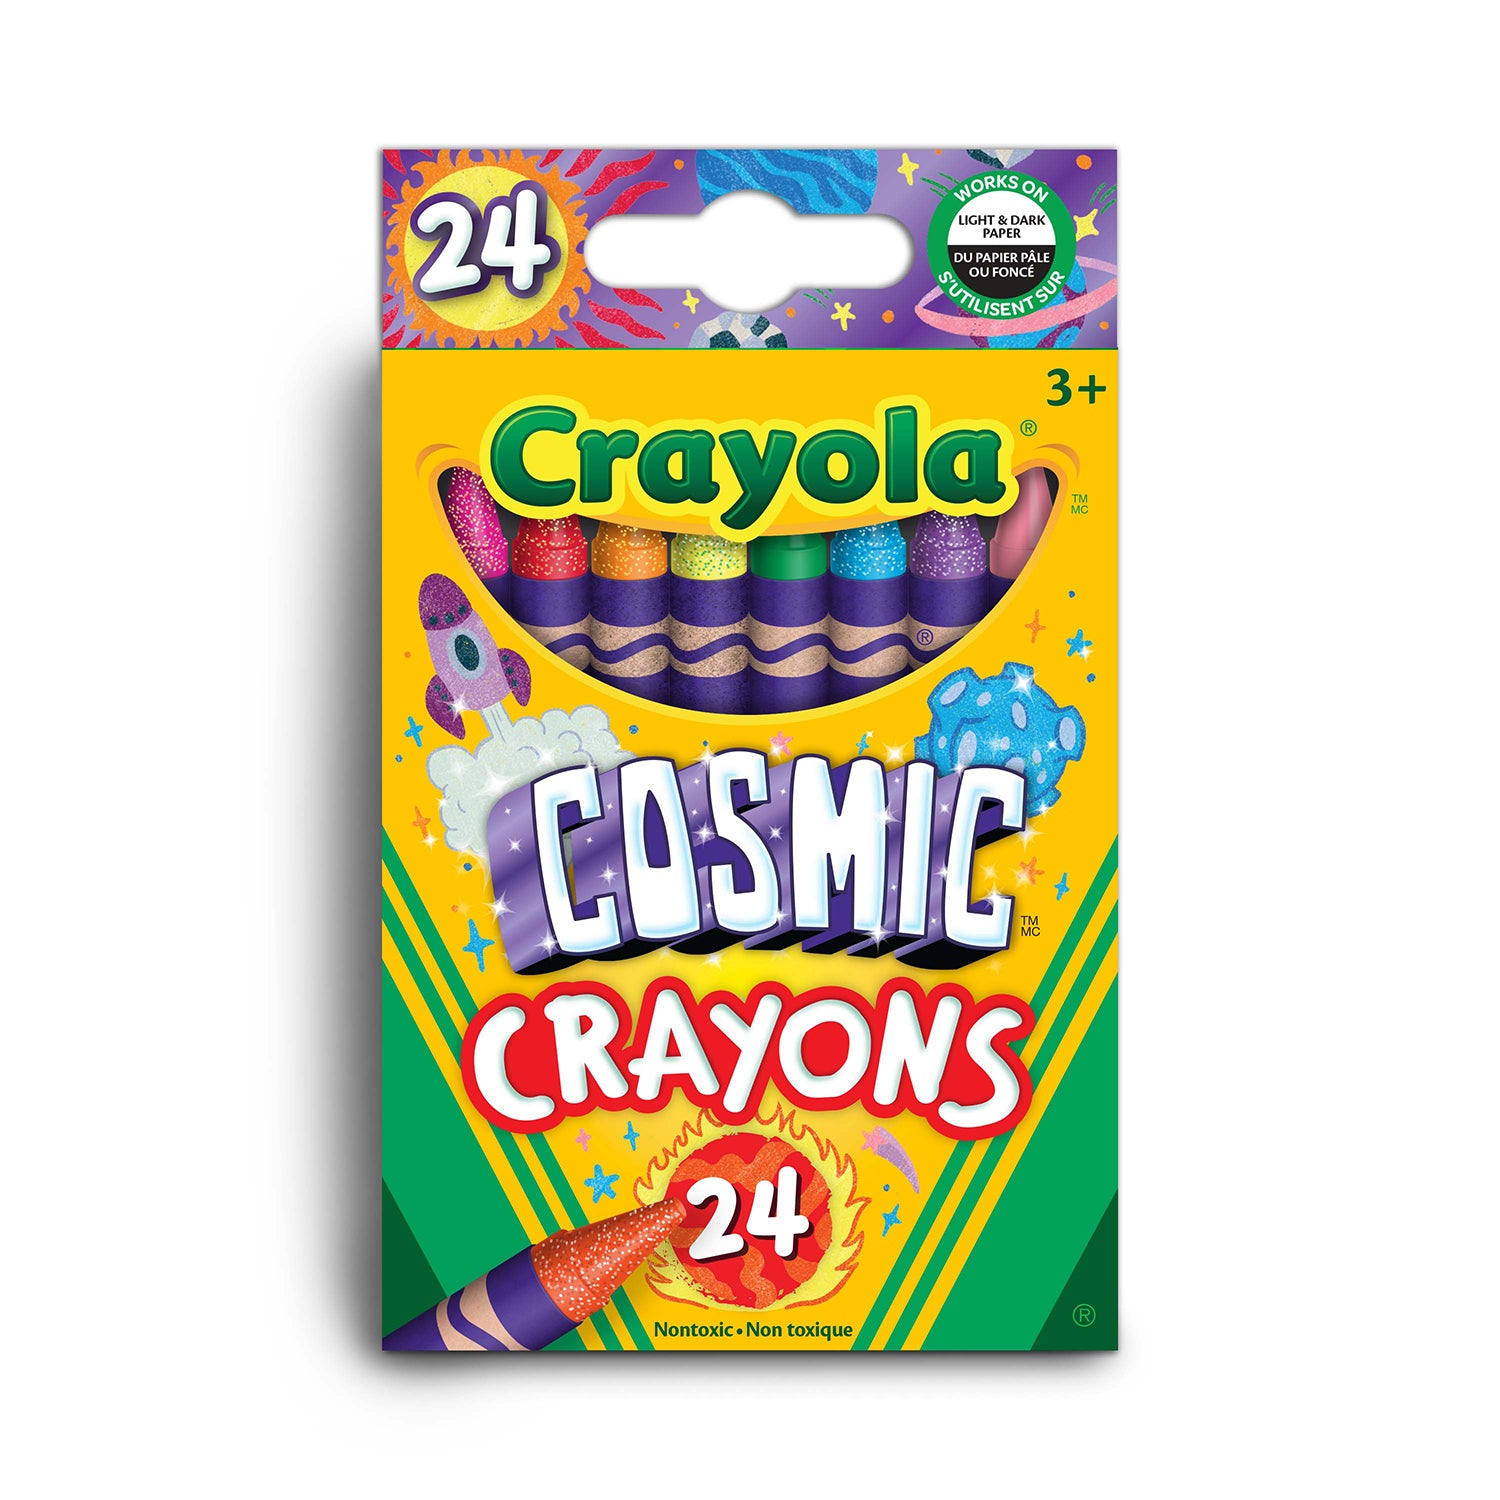 Crayola Glow Fusion Mythical Creatures Glow in The Dark Coloring Set Each